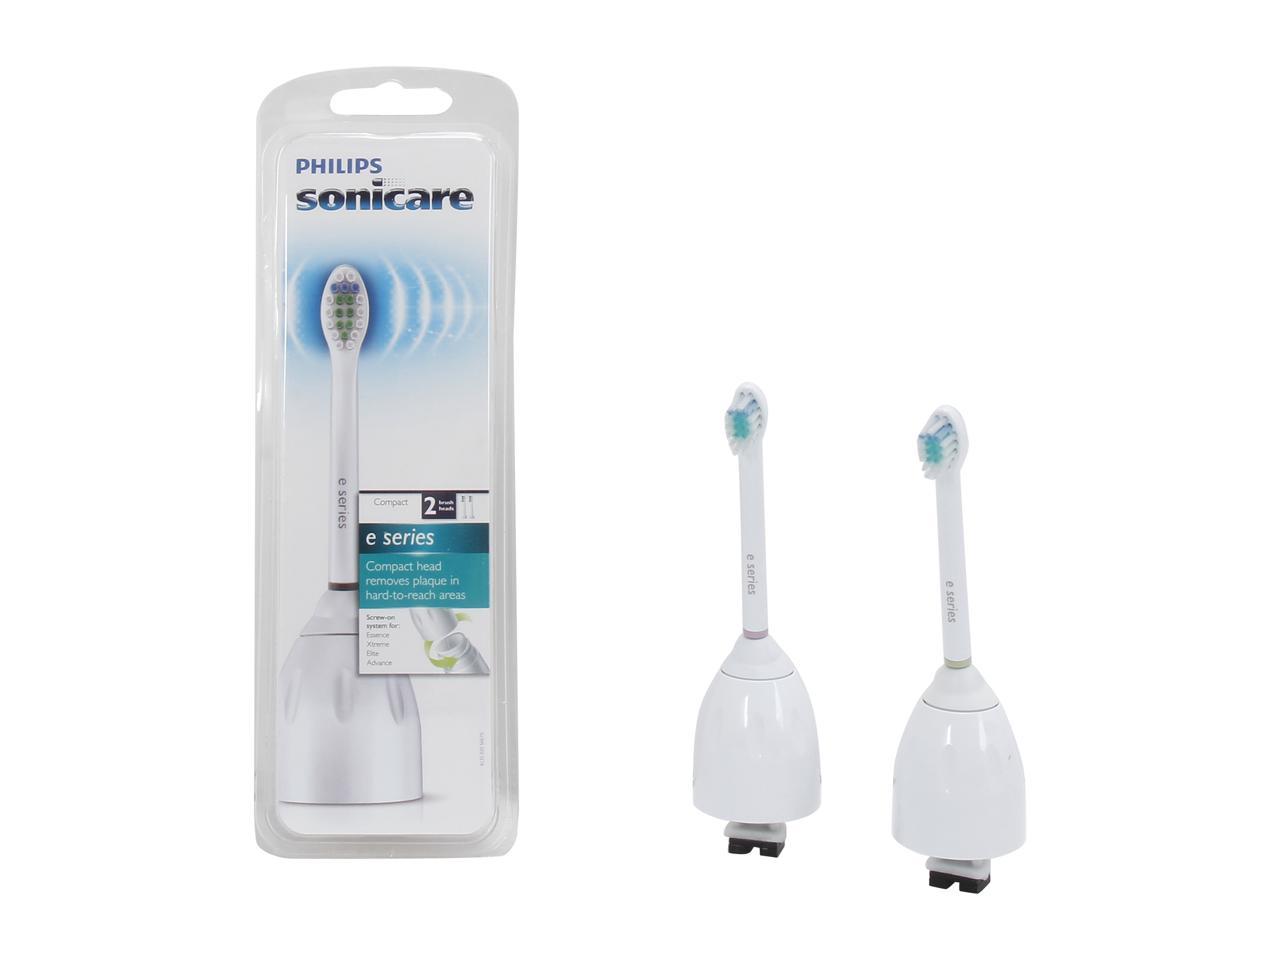 philips-sonicare-hx7012-66-e-series-compact-sonic-toothbrush-heads-2